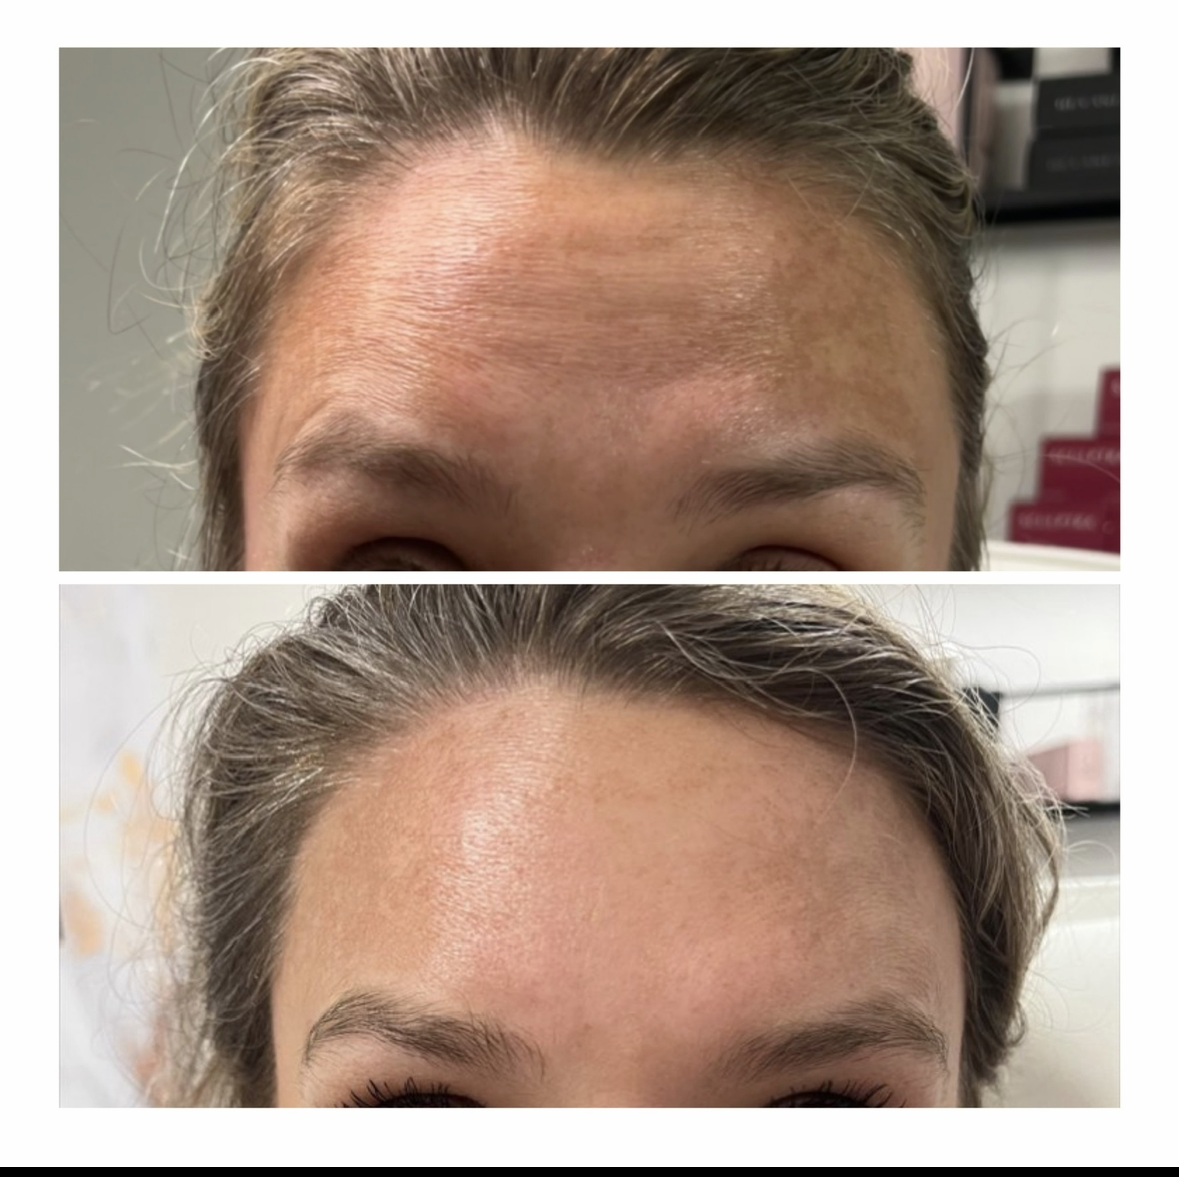 W Aesthetics Botox Before and After. Austin Texas12